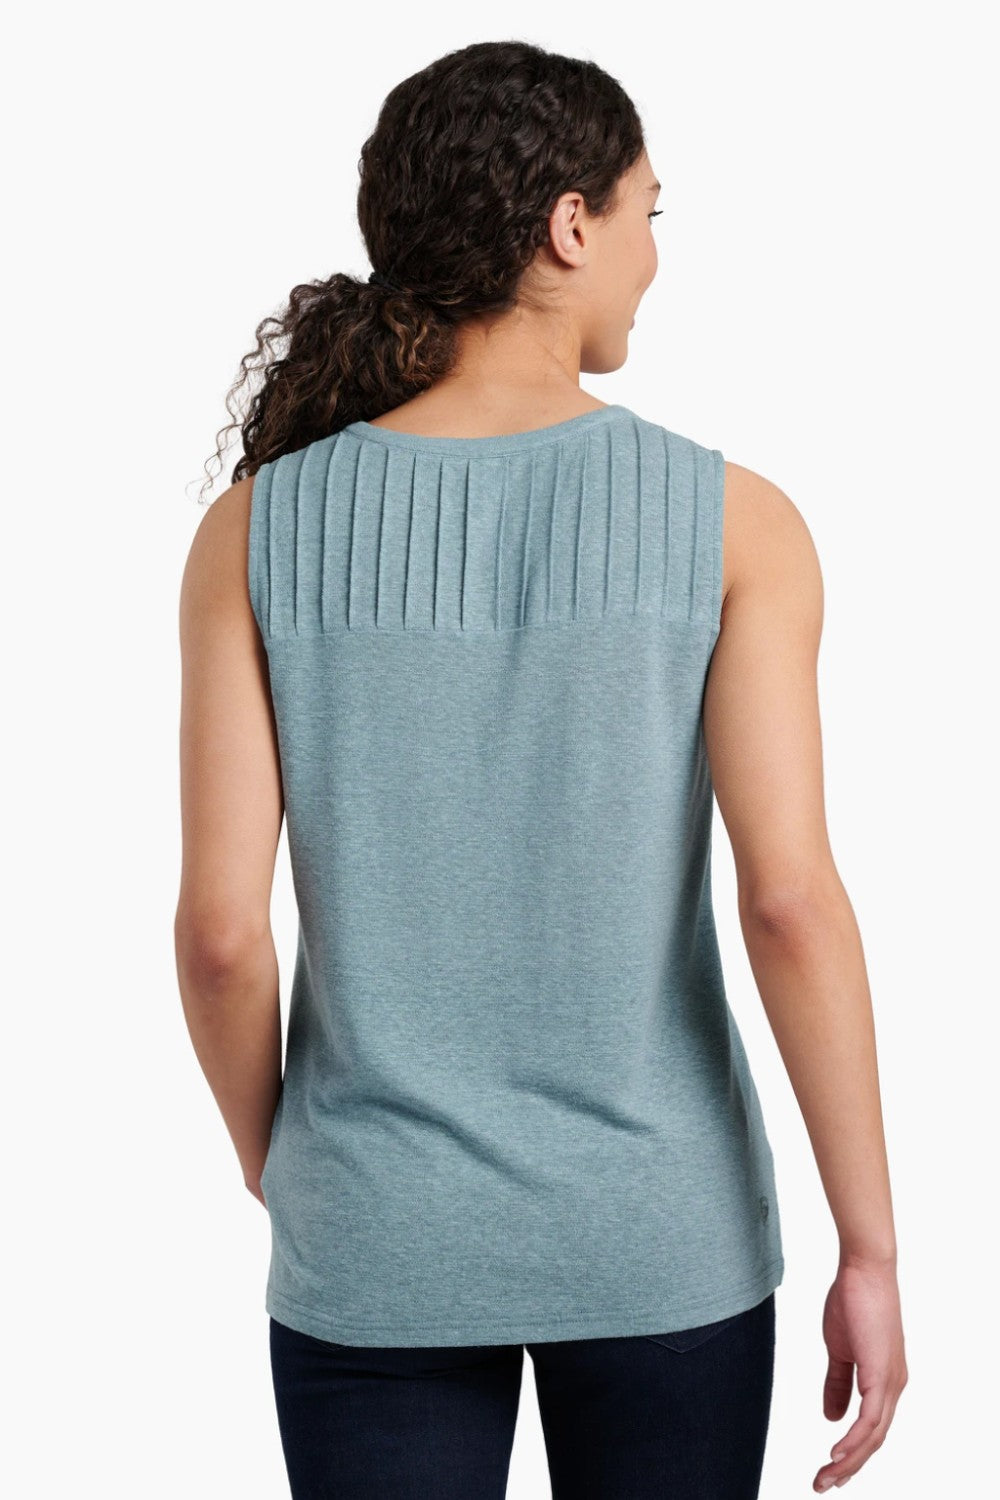 Soft and sustainable, the BRISA™ Tank features a luxurious hemp blend for premium comfort when temperatures rise. A flattering henley neckline and pintuck details take this summer top to the next level.